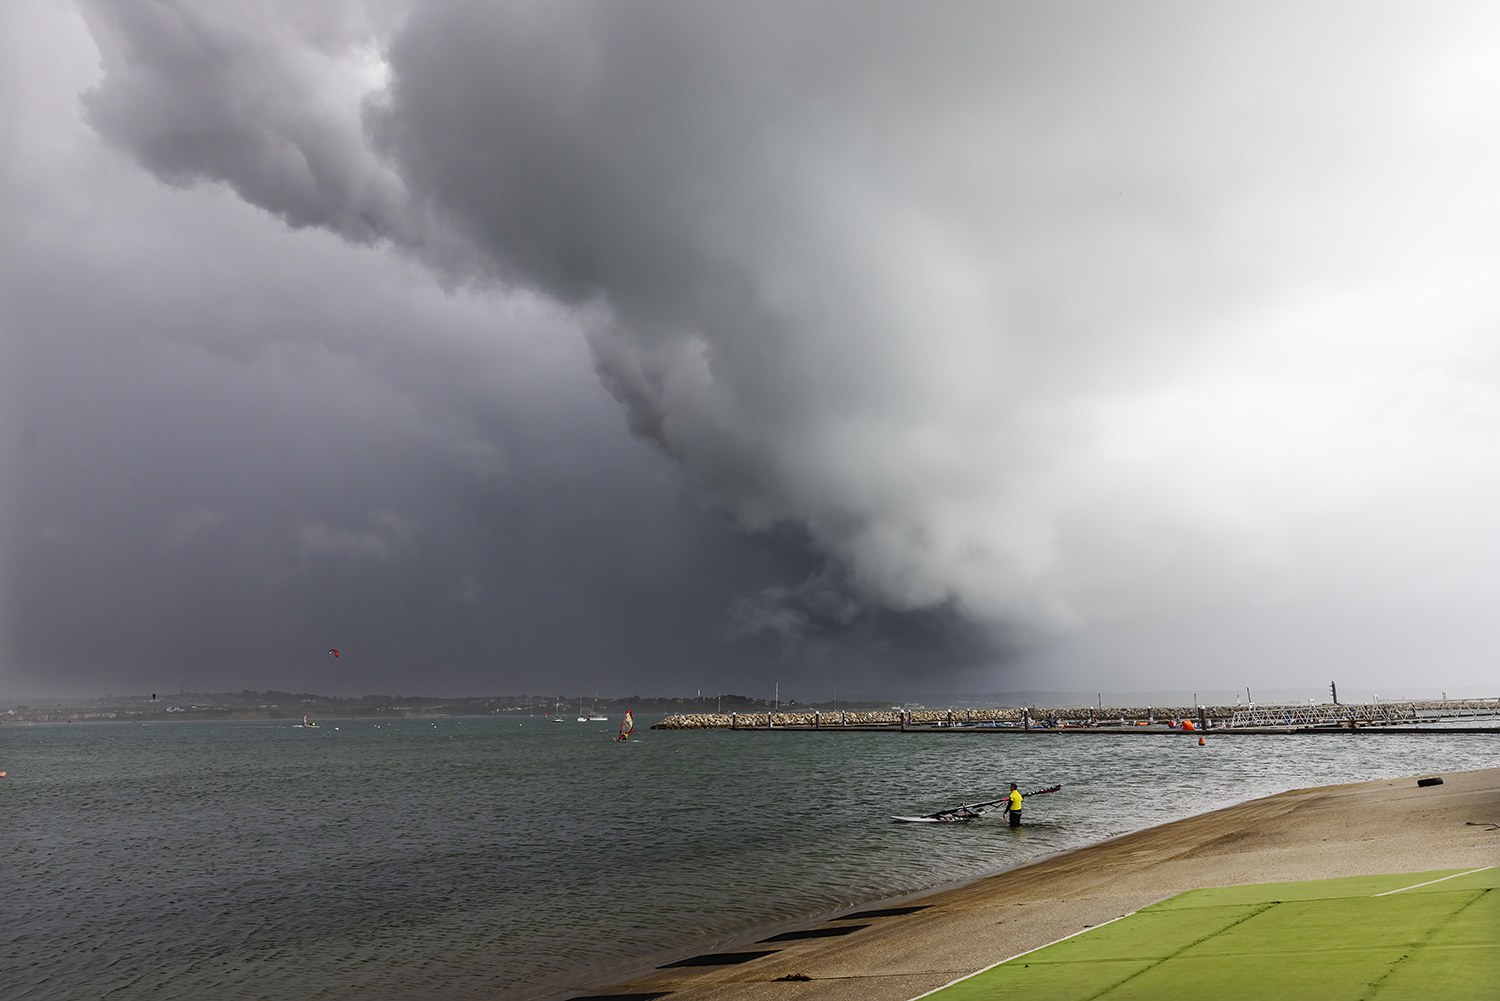 Ominous clouds over Weymouth